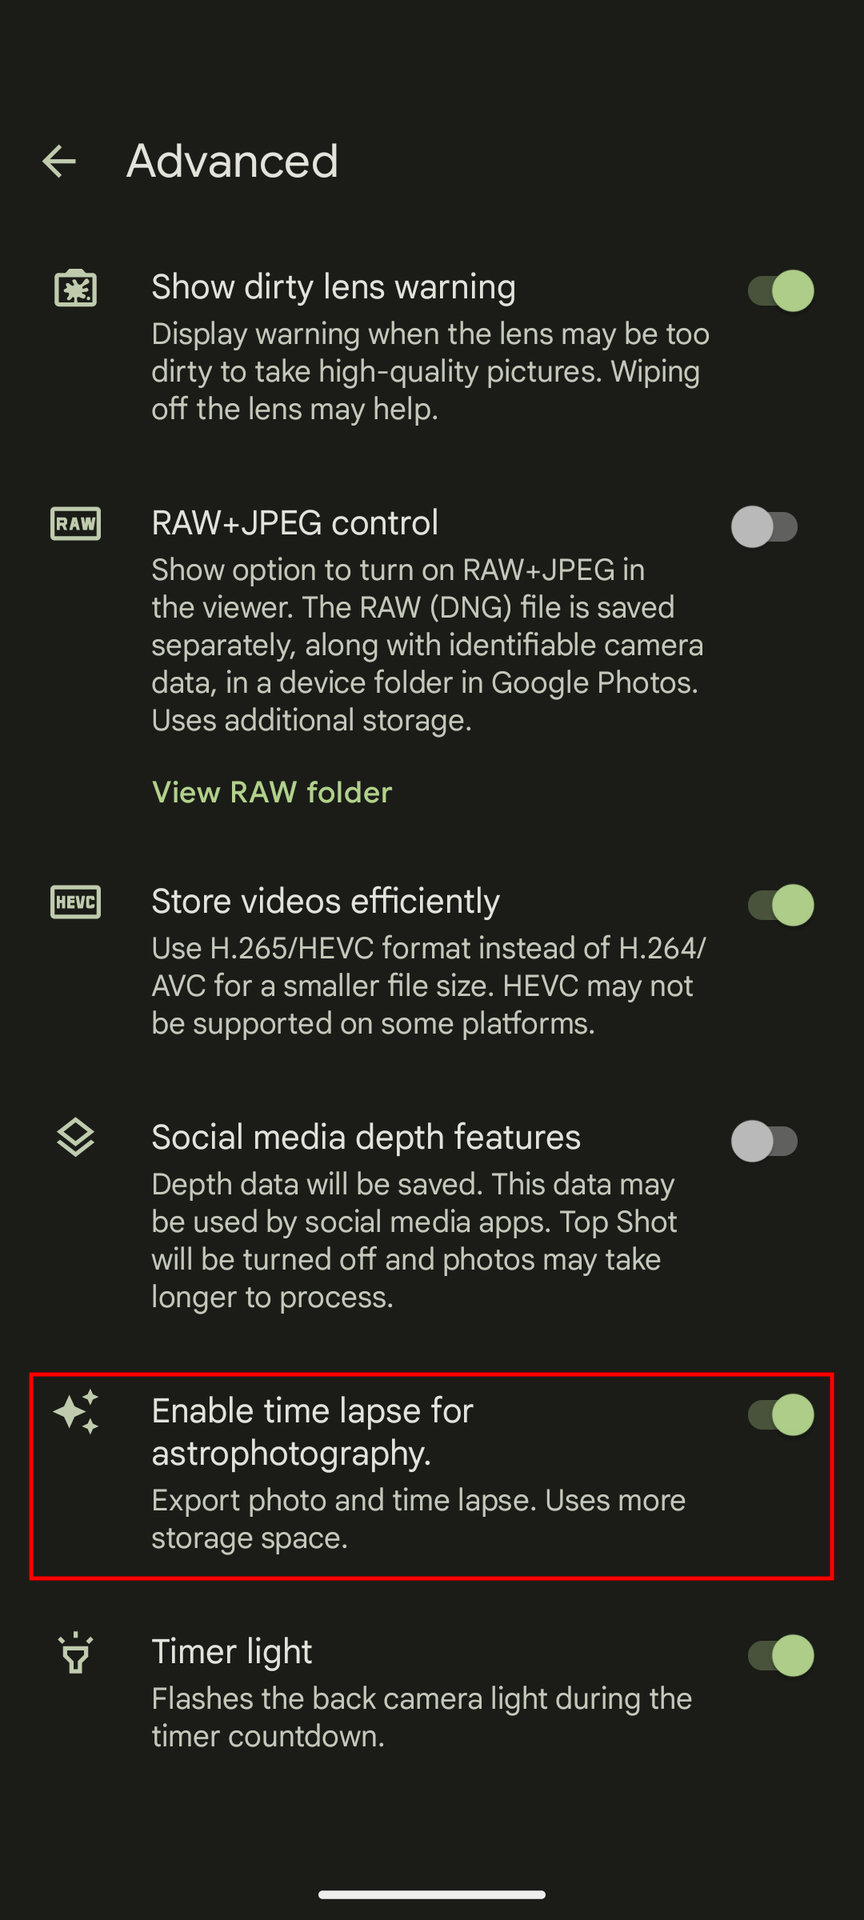 How to enable Time Lapse for Astrophotography on Pixel 7 4